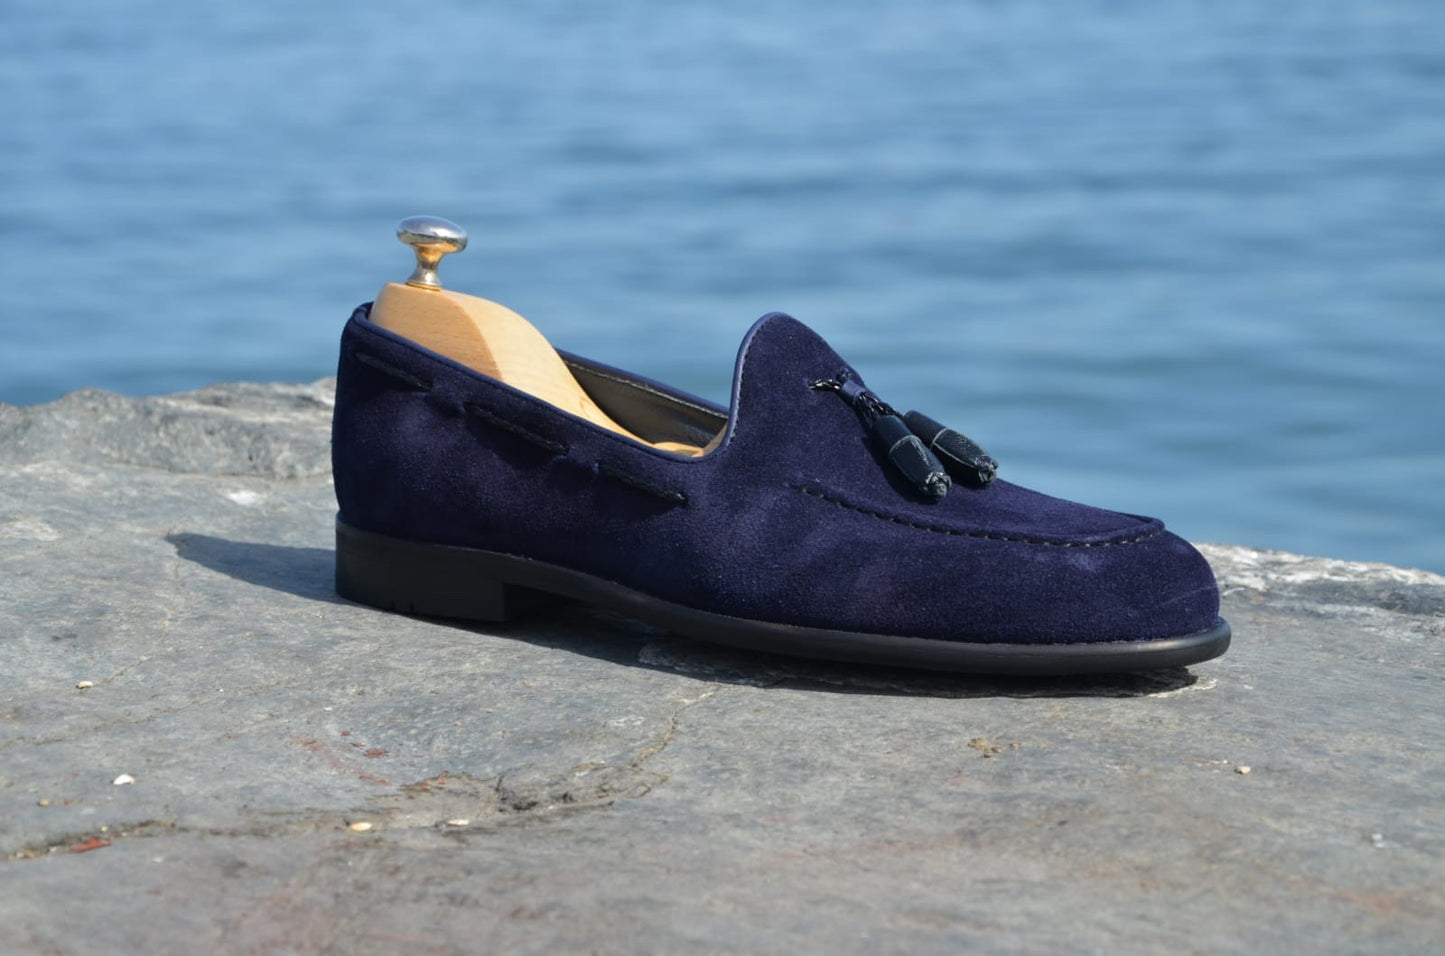 Suade Calf- Leather Loafer Shoes Navy Blue